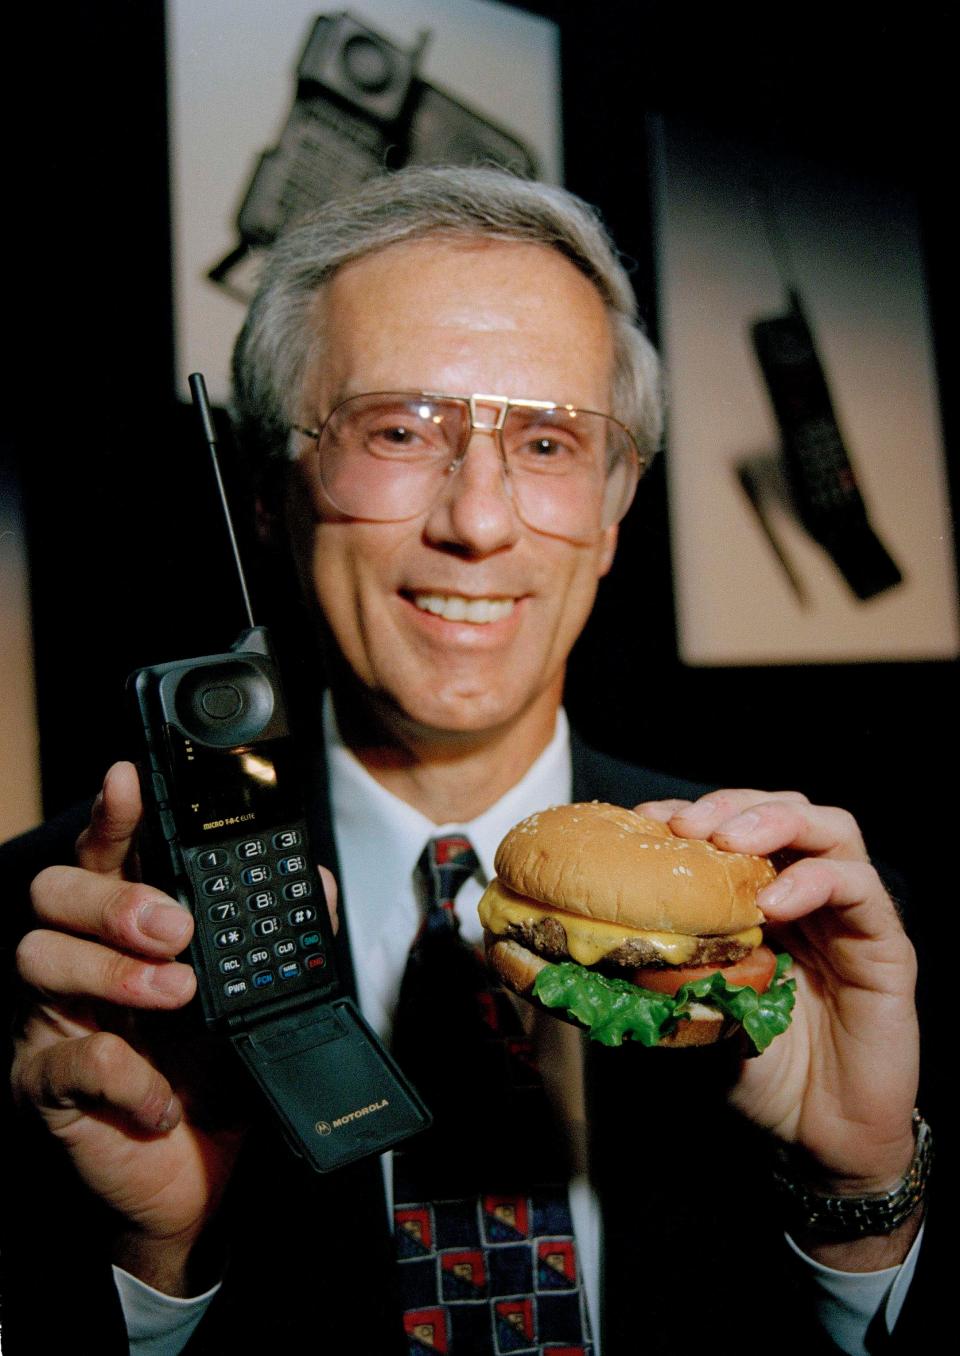 man with gray hair wearing a suite holding a Motorola MicroTac Elite cell phone in one hand, and a burger in his other hand to compare the sizes